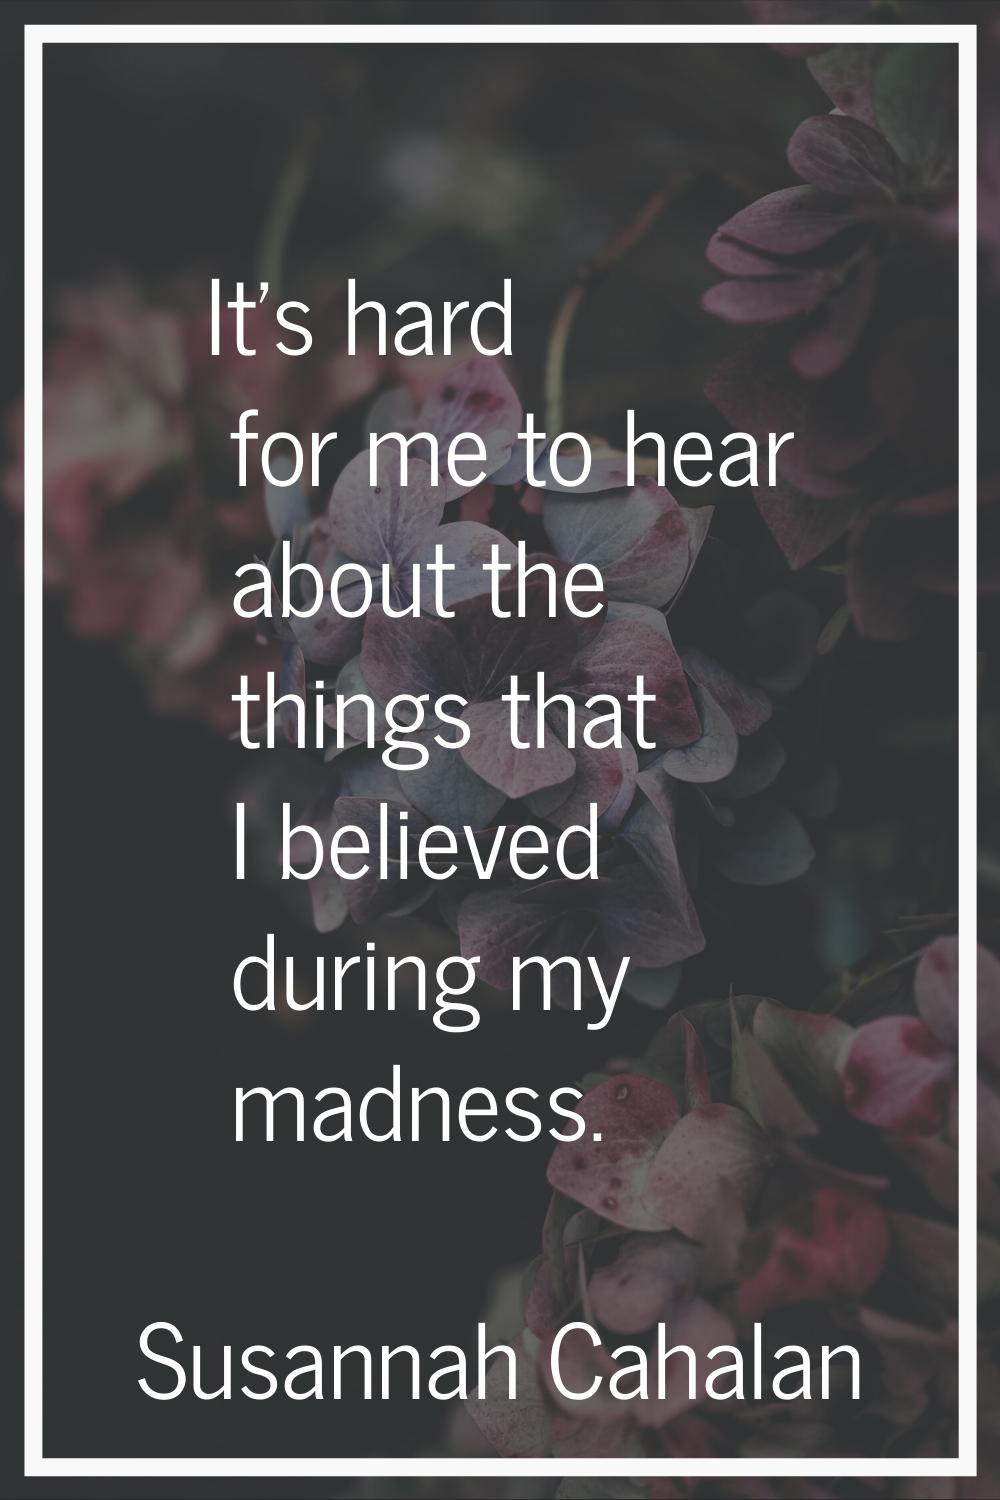 It's hard for me to hear about the things that I believed during my madness.